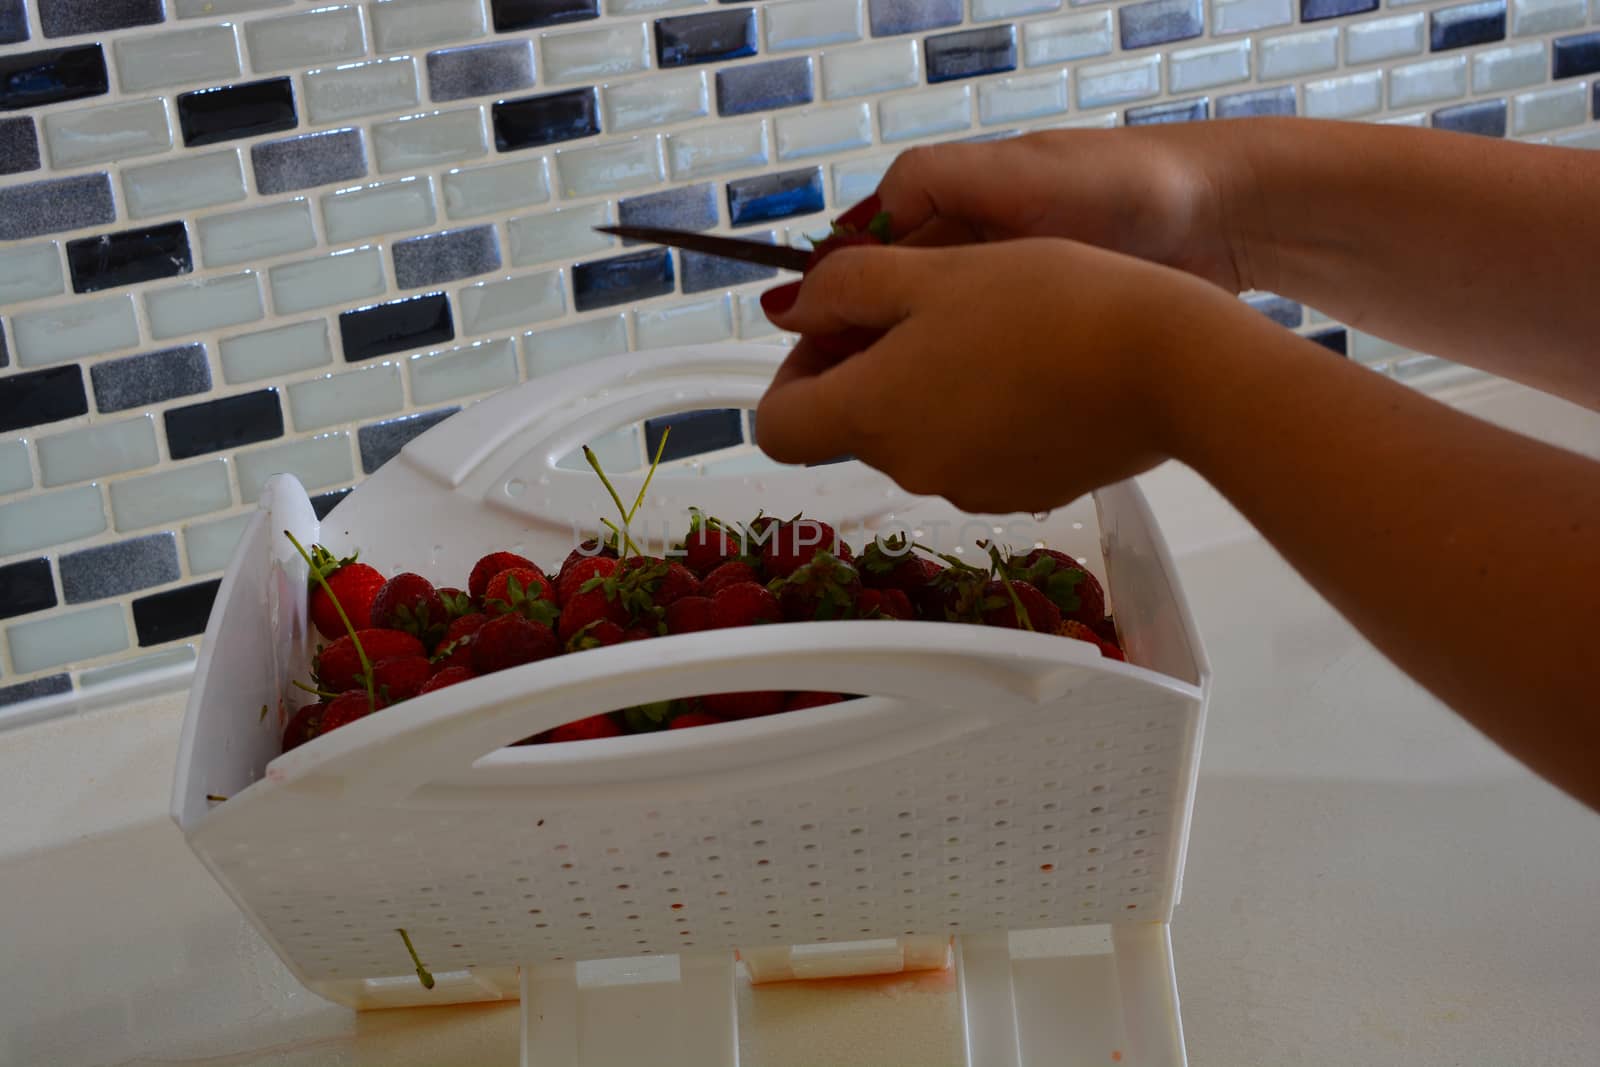 woman cleans newly collected strawberries with a knife